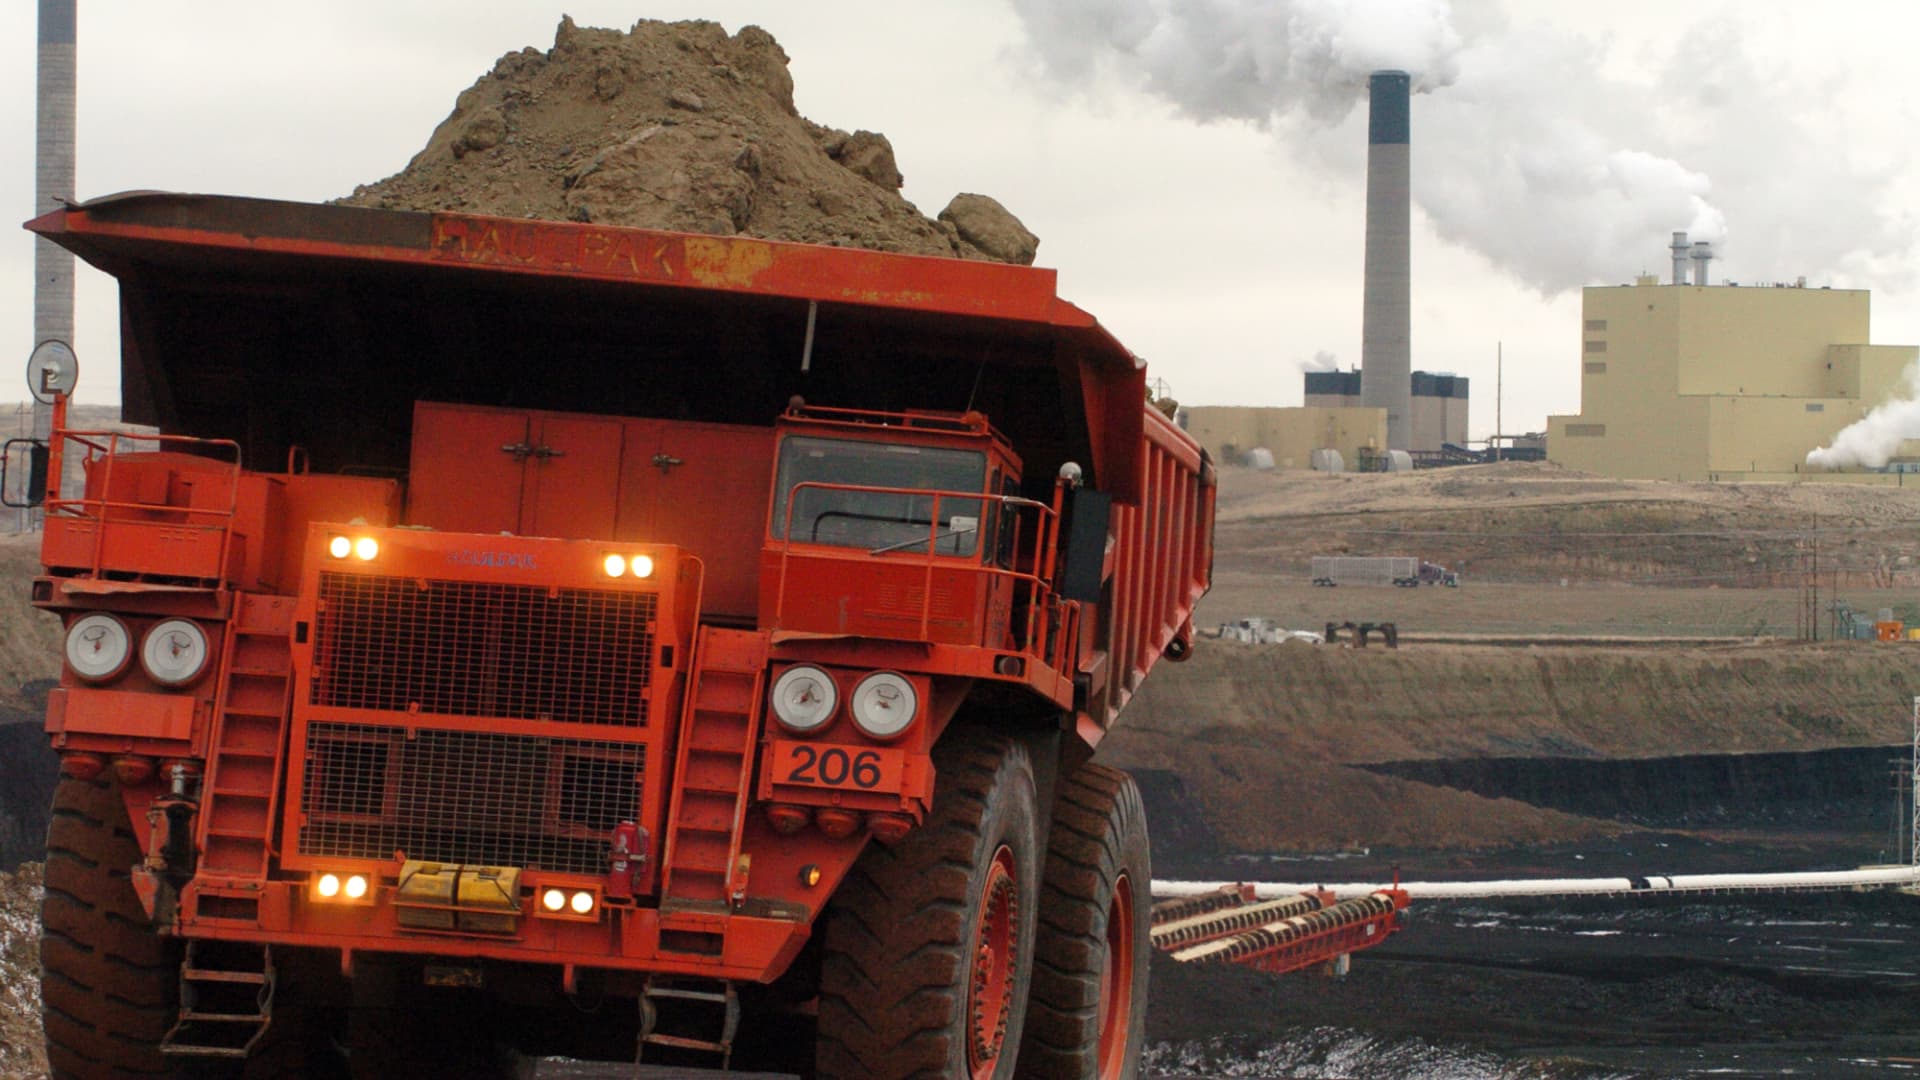 Investment pros name 2 stocks to play record-high coal prices